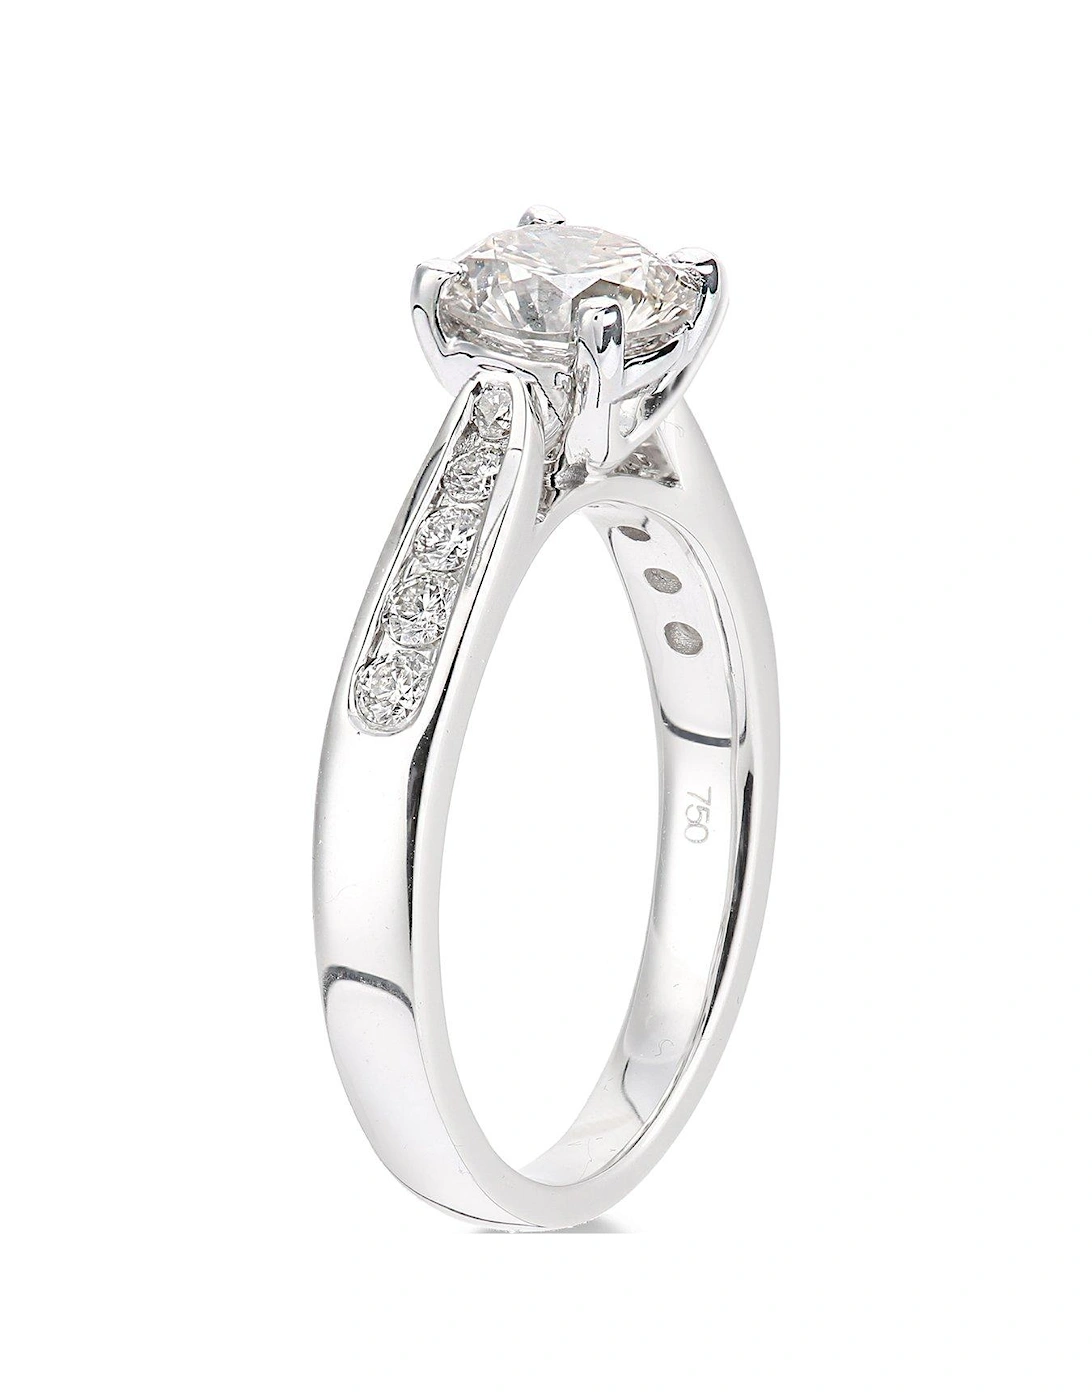 18ct White Gold Claw Set 70 Point Diamond Ring with Diamond Set Shoulders